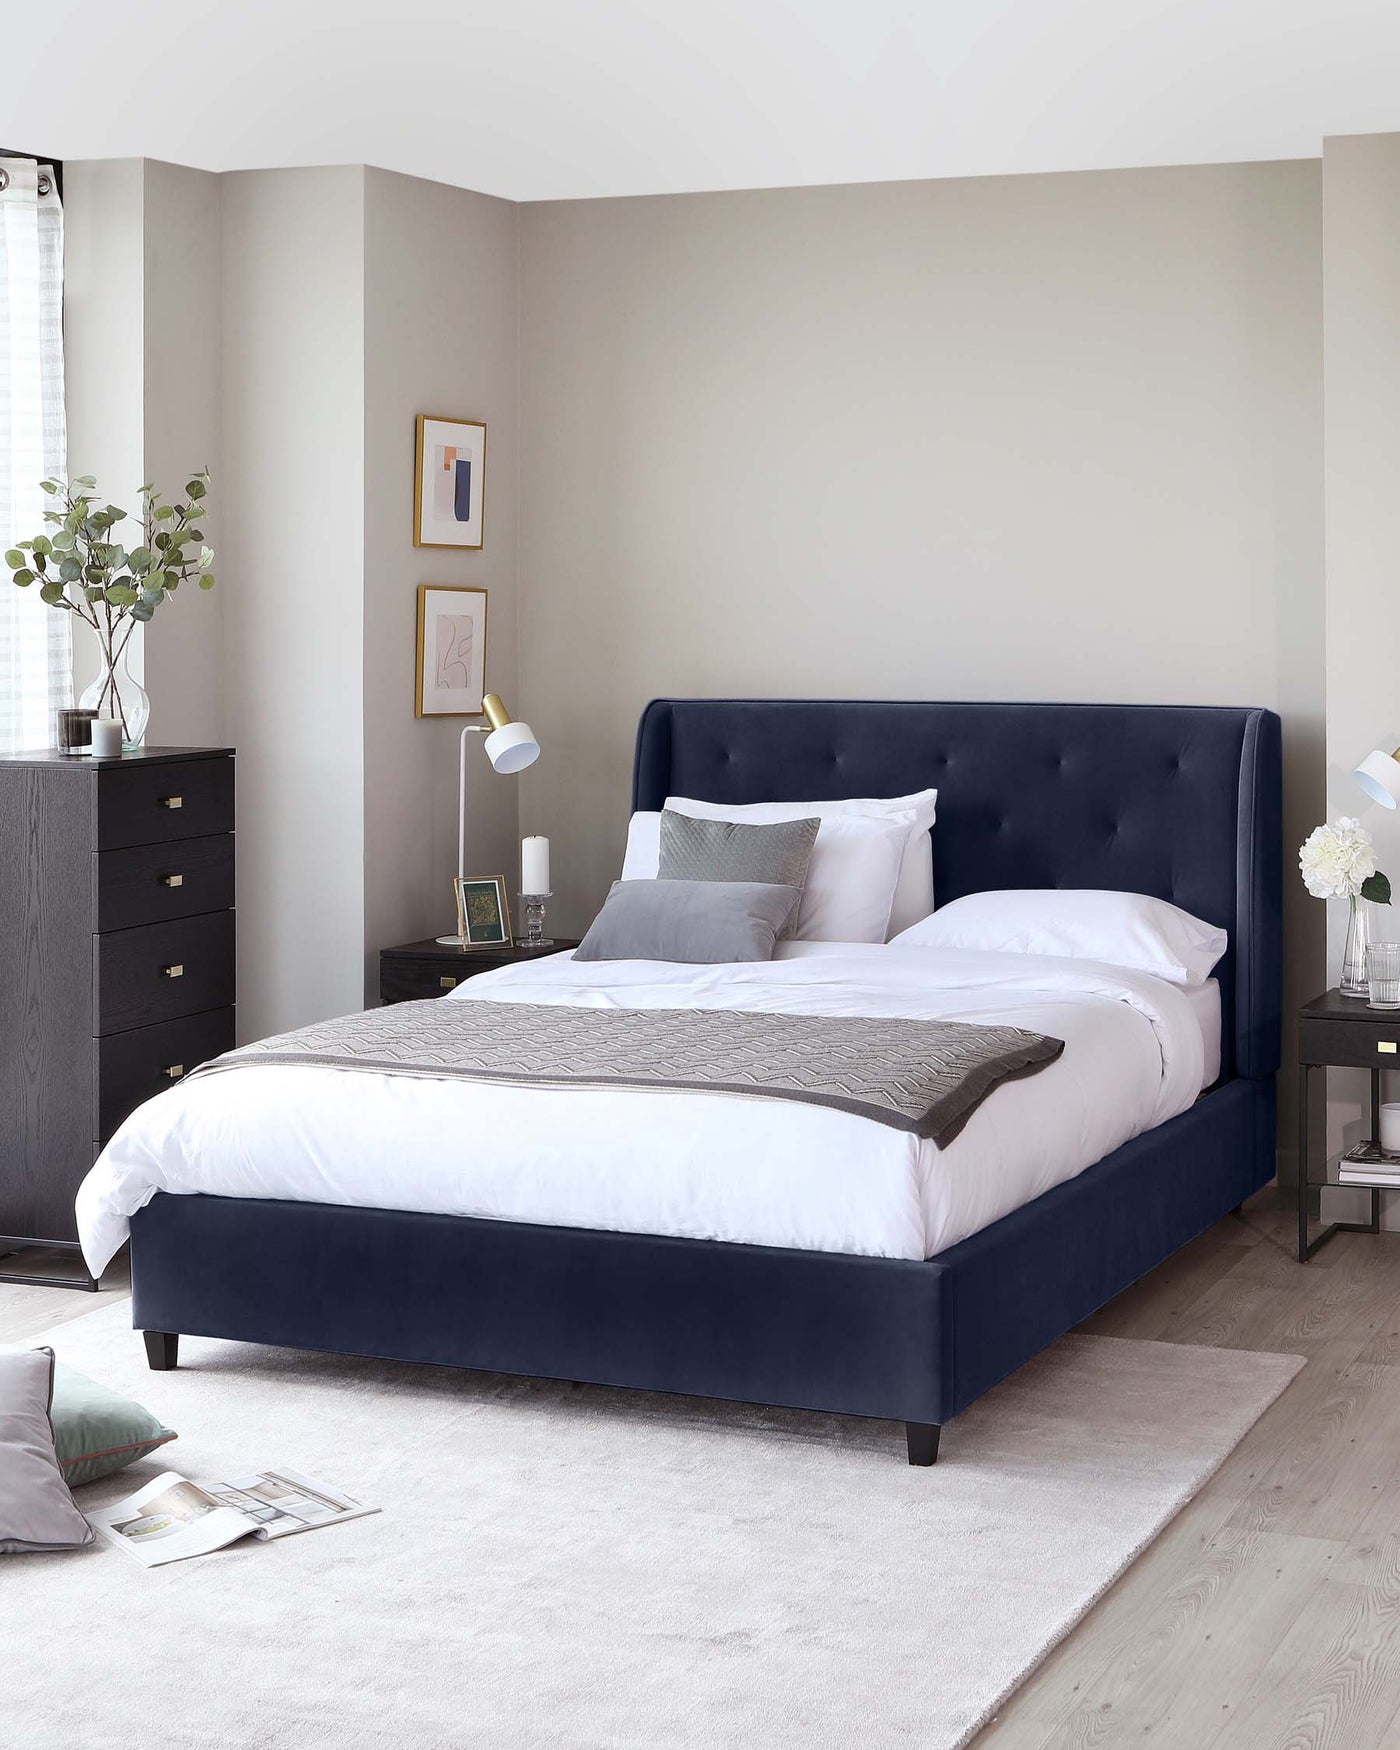 Elegant bedroom scene featuring a navy blue upholstered bed with a tufted headboard, flanked by two matching nightstands with subtle metallic knobs, and a coordinating tall dresser with multiple drawers, all resting on a plush, light grey area rug.